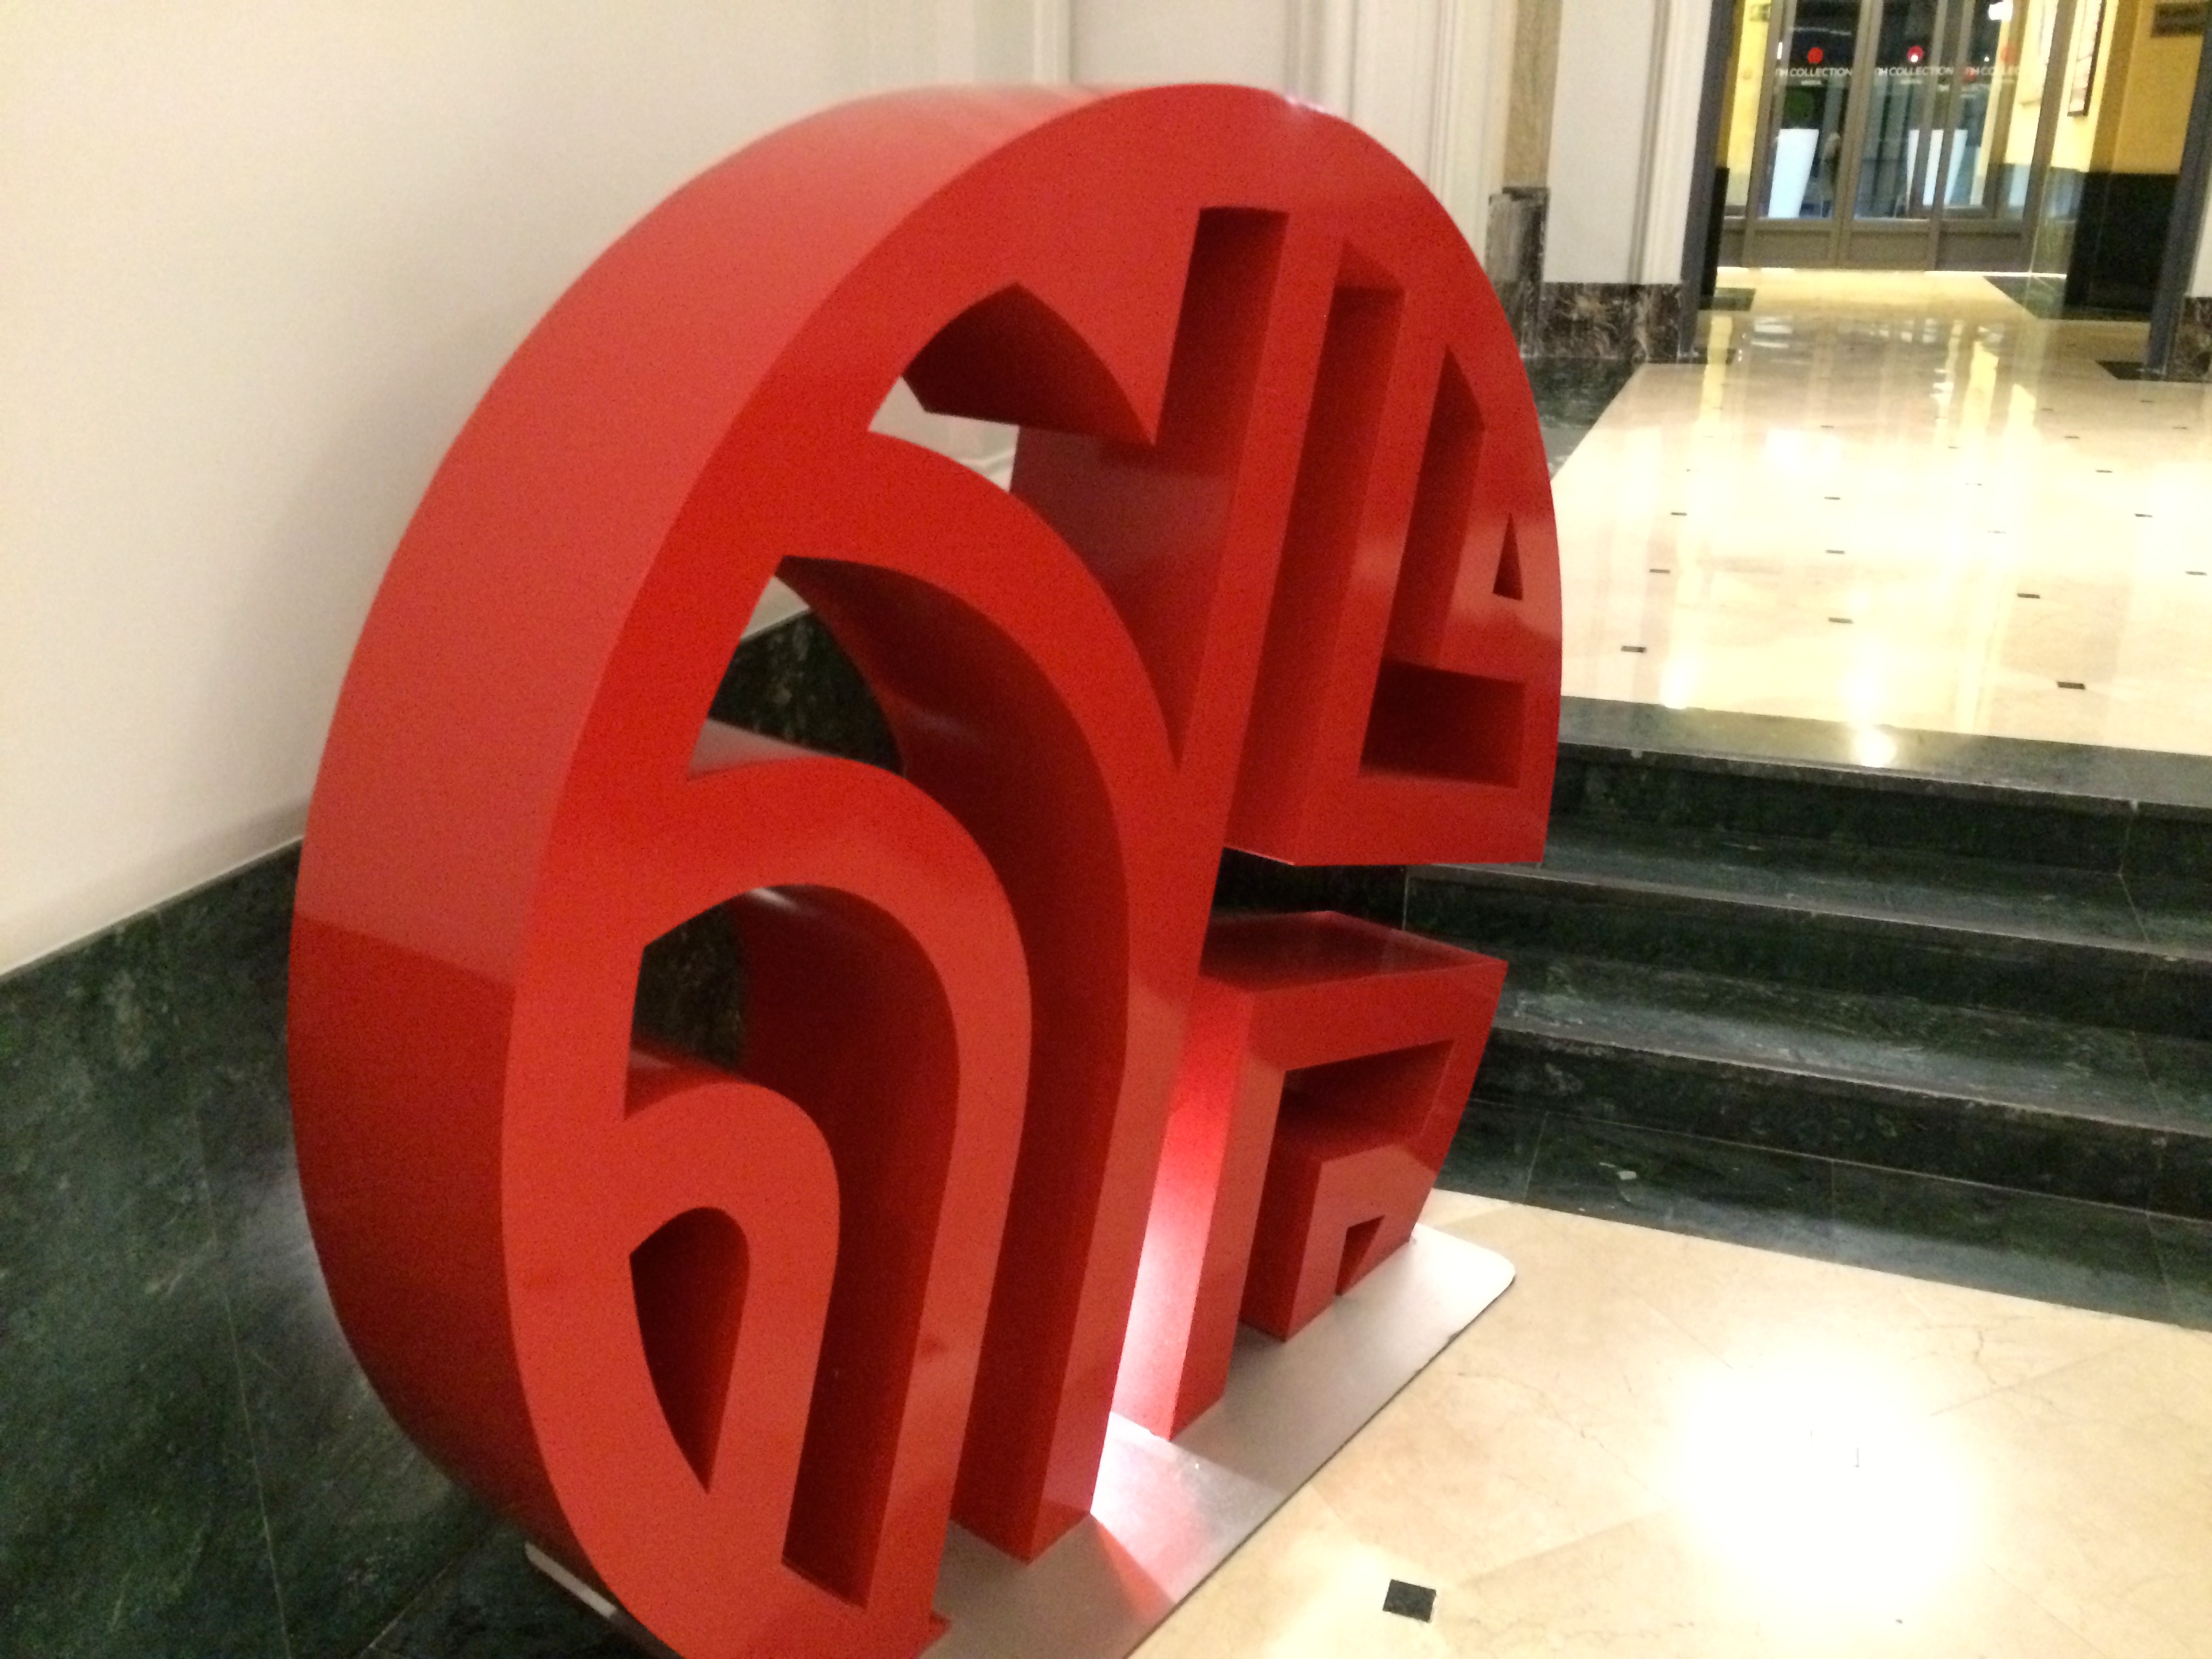 a red sculpture in a hallway